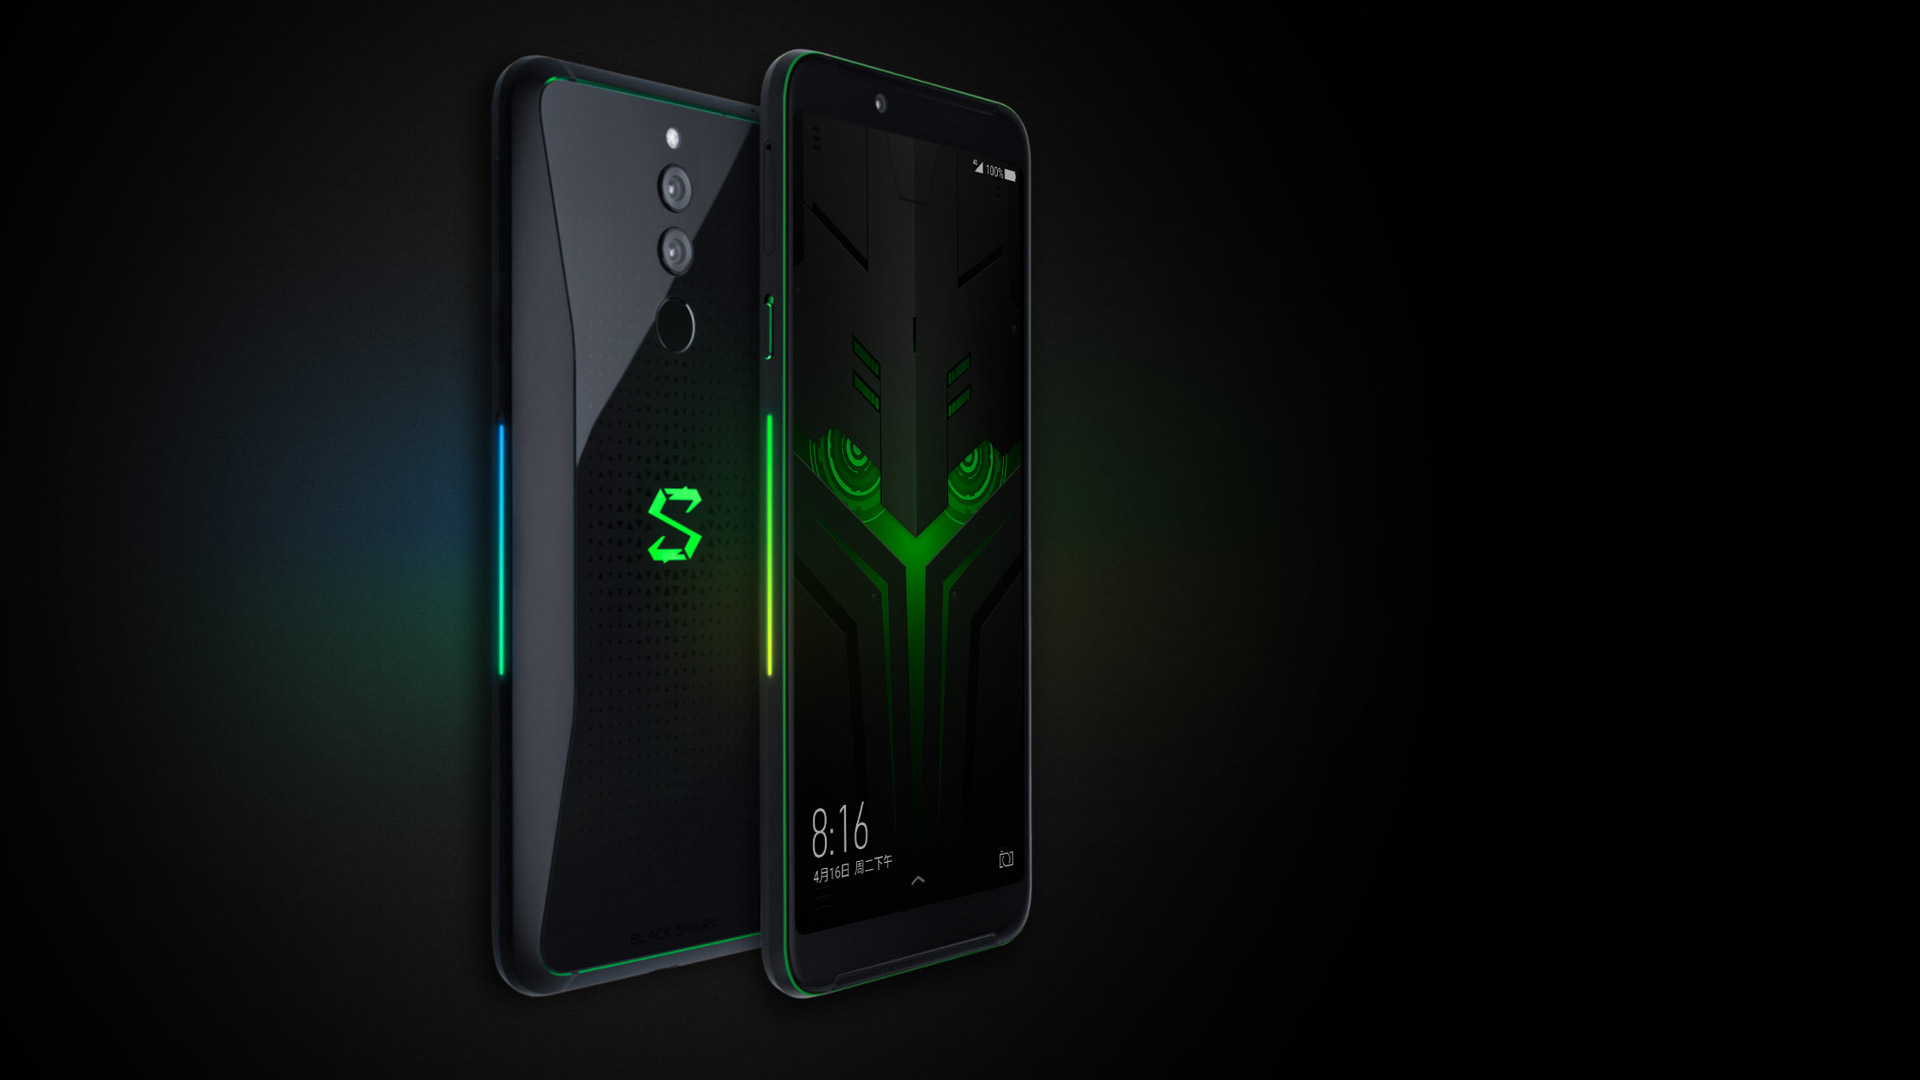 Xiaomi Black Shark Helo: First smartphone in the world with 10GB RAM